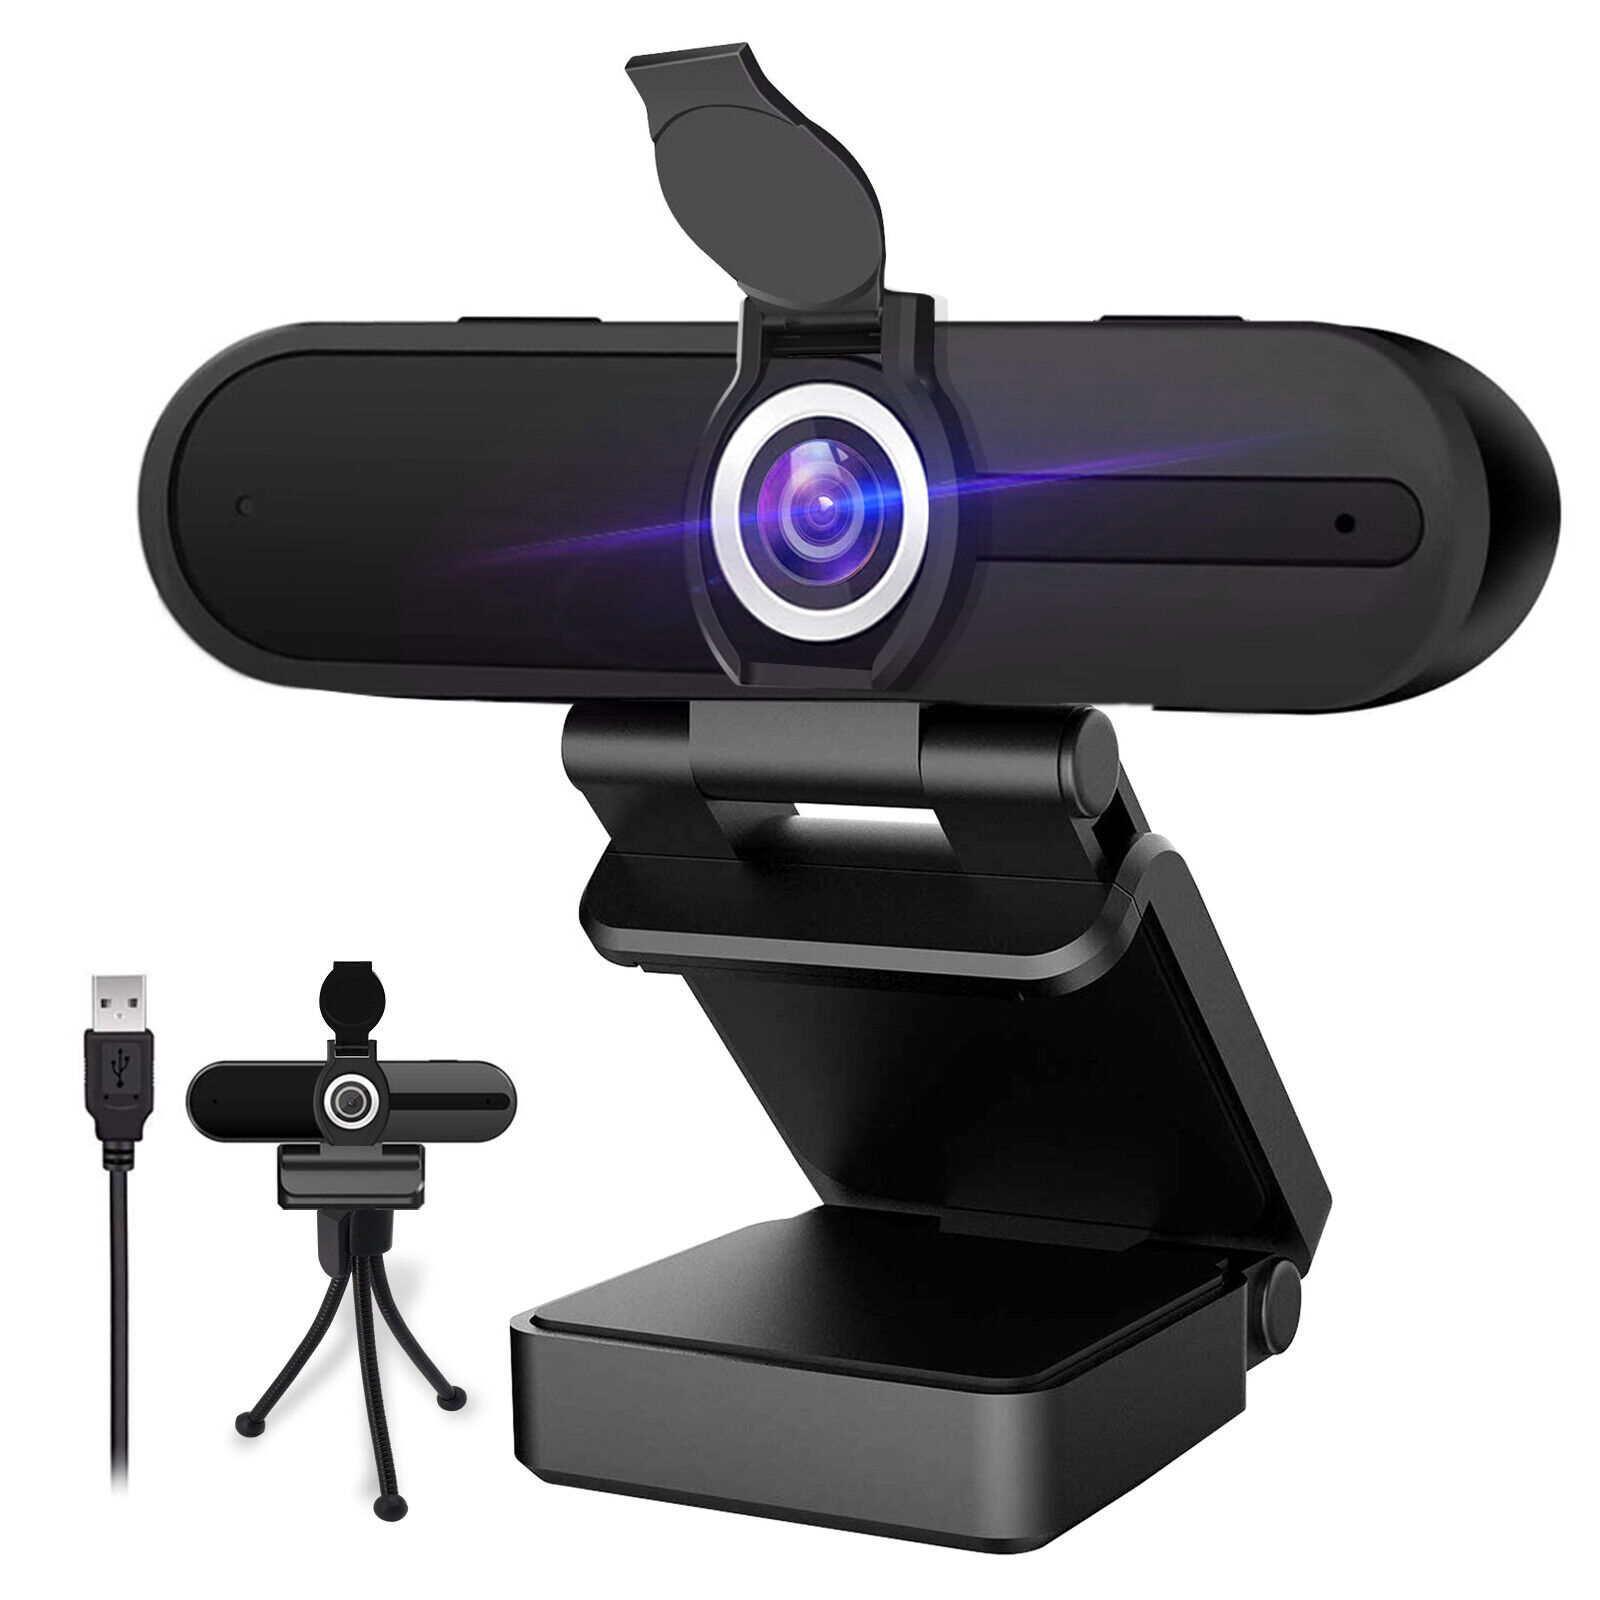 4K Webcam Full HD/8MP/Stream/Wide Angle with Microphone, Tripod, Privacy Cover